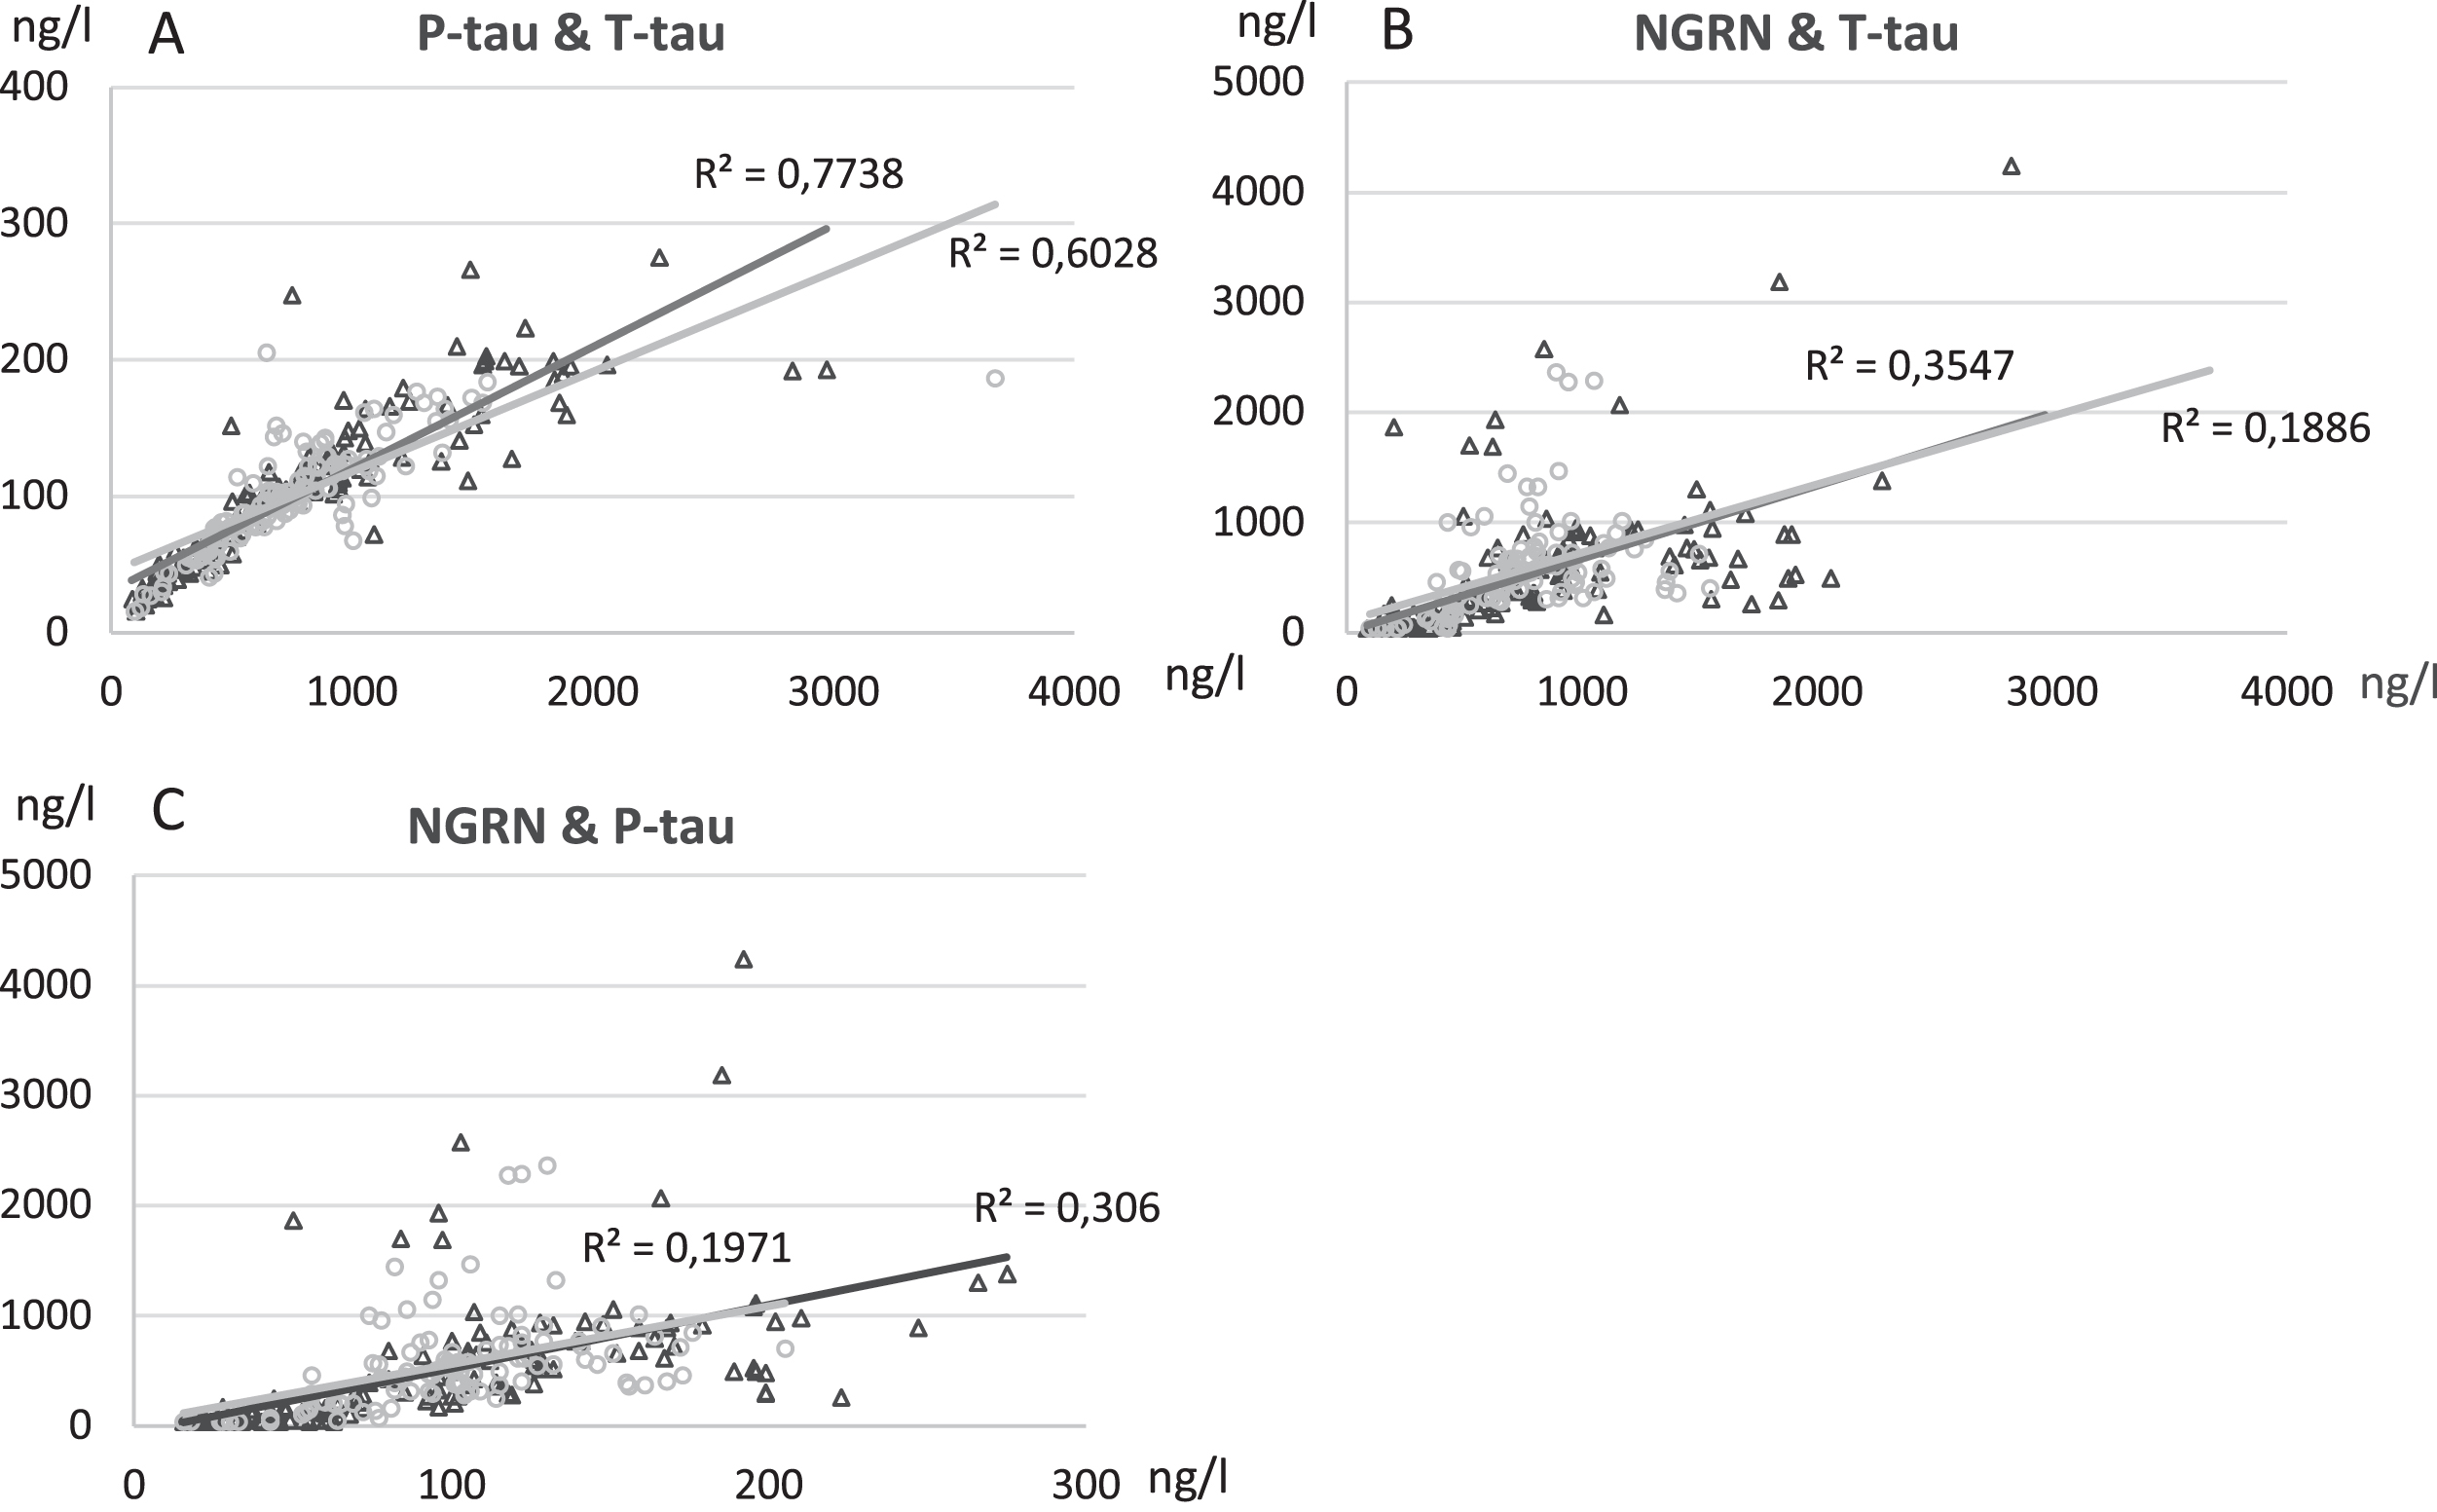 Correlation analysis of T-tau levels versus levels of P-tau (A), T-tau versus NRGN (B), P-tau versus NRGN (C) in lumbar (L-CSF, black triangle) and ventricular (V-CSF, light gray circle) samples. Pearson R2 values and significance level were calculated, and linear graphs adjusted according to the values. All time points of B1, B0, 3 M, 6 M, and 18 M are included in correlation analysis. T-tau, total tau; P-tau, tau phosphorylated at threonine 181; NRGN, neurogranin; B1, pre-surgery sample collection timepoint; B0, baseline visit of the follow-up; 3 M, three-month study visit; 6 M, six-month study visit; 18 M, 18-month study visit; L-CSF, cerebrospinal fluid collected with lumbar puncture; V-CSF, cerebrospinal fluid collected with shunt valve puncture.